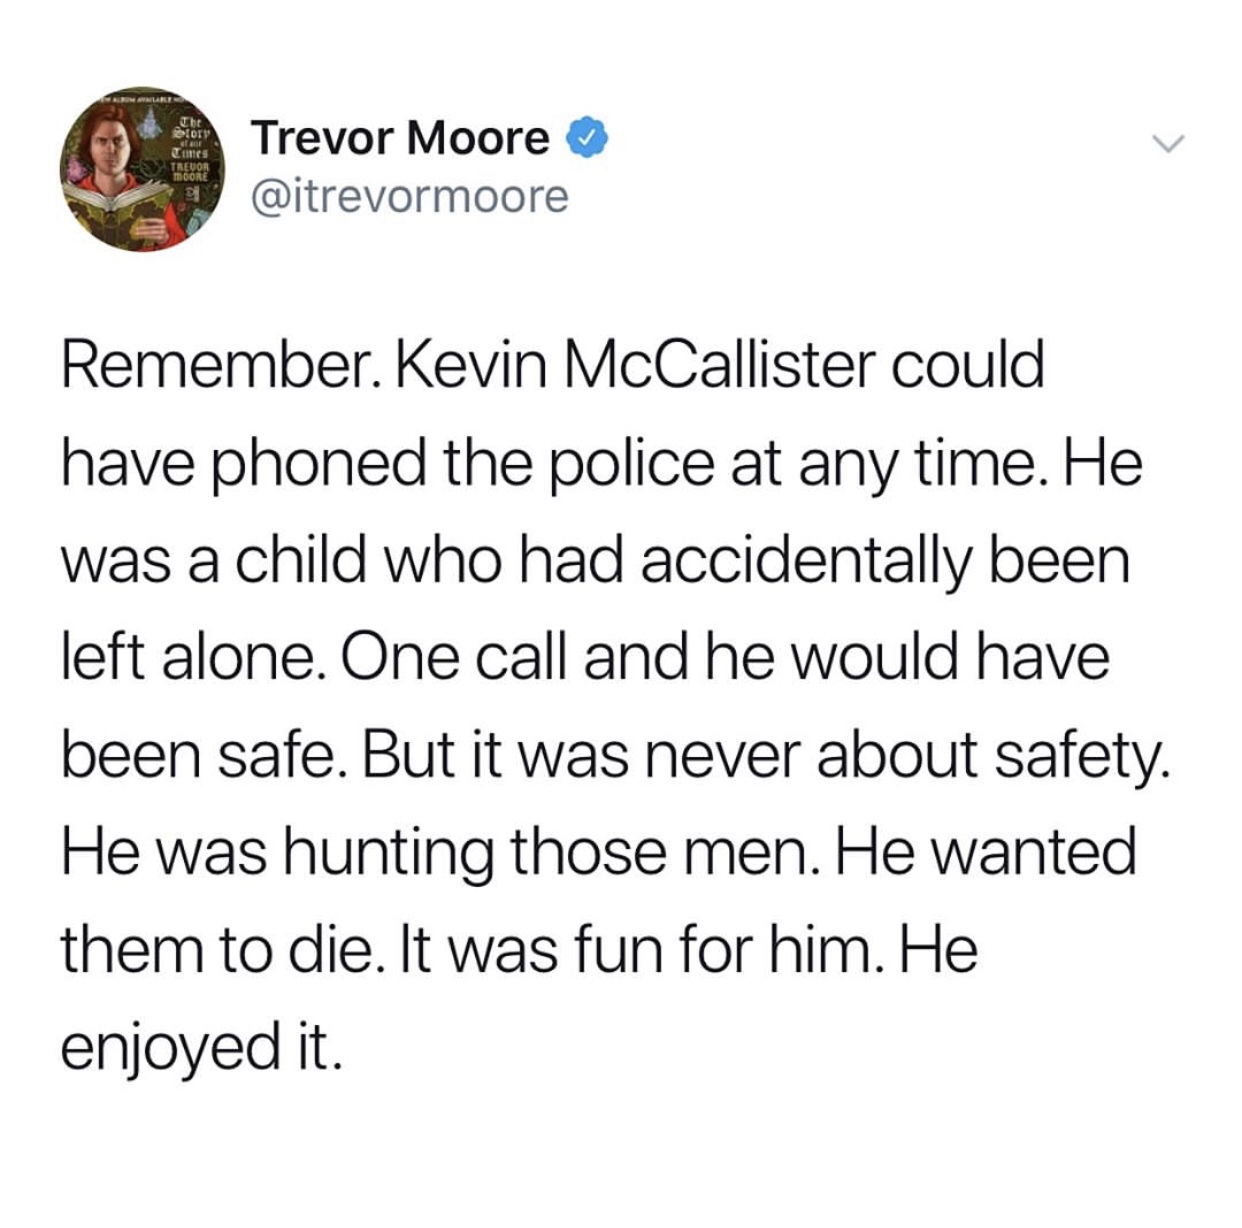 memes - join me eating dirt - The Diy Tues Treuor Door Trevor Moore Remember. Kevin McCallister could have phoned the police at any time. He was a child who had accidentally been left alone. One call and he would have been safe. But it was never about saf